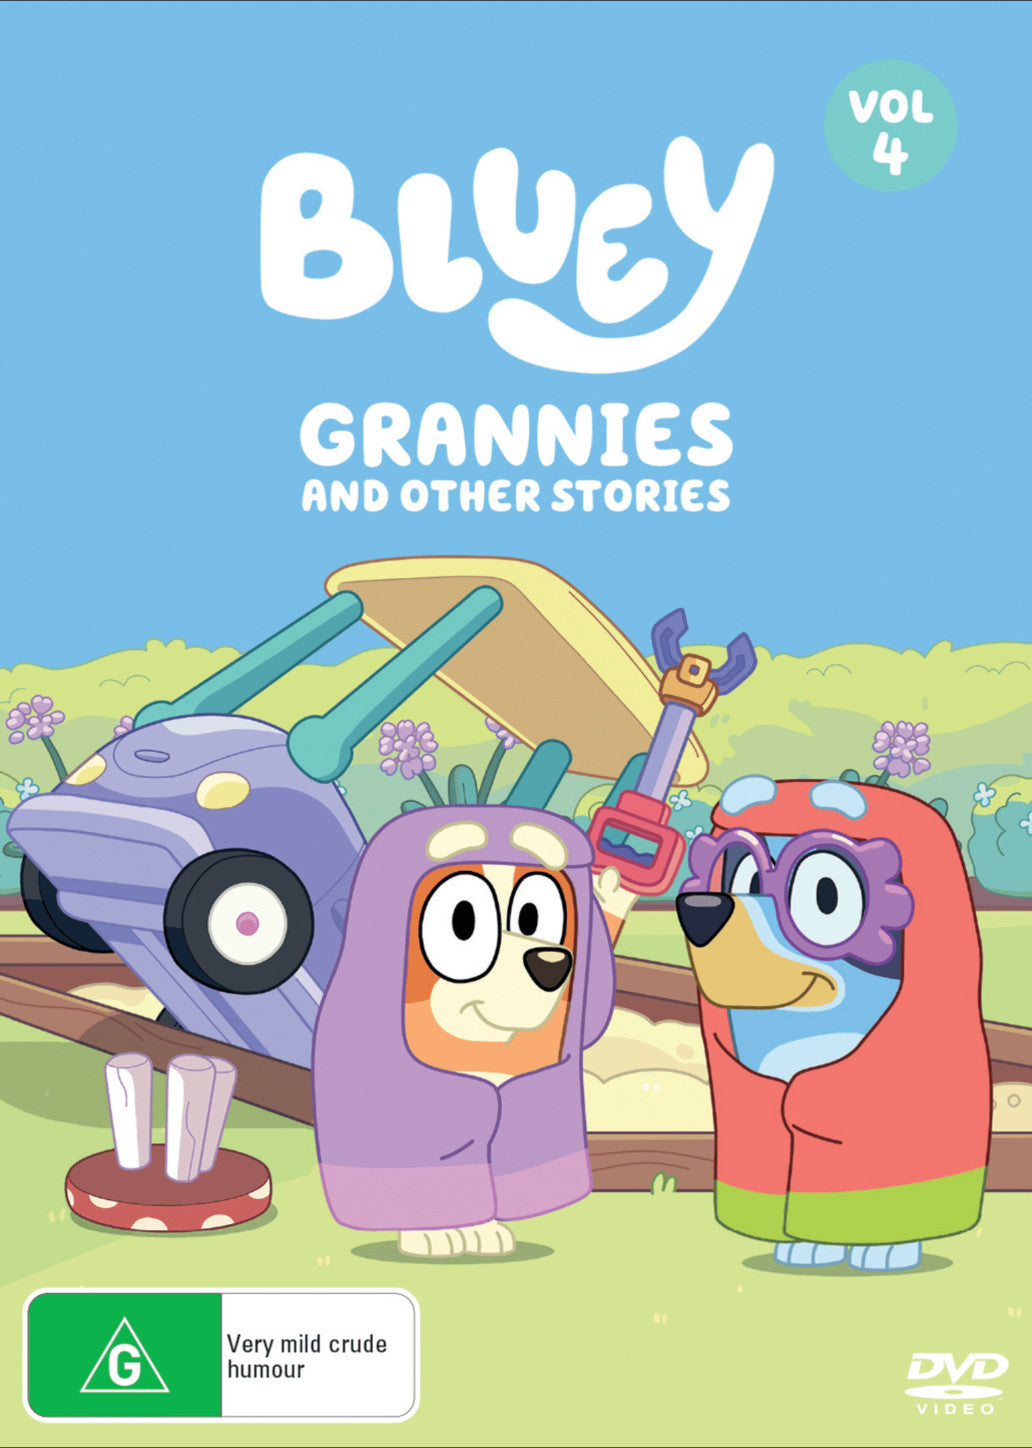 BLUEY: GRANNIES AND OTHER STORIES (VOL 4)